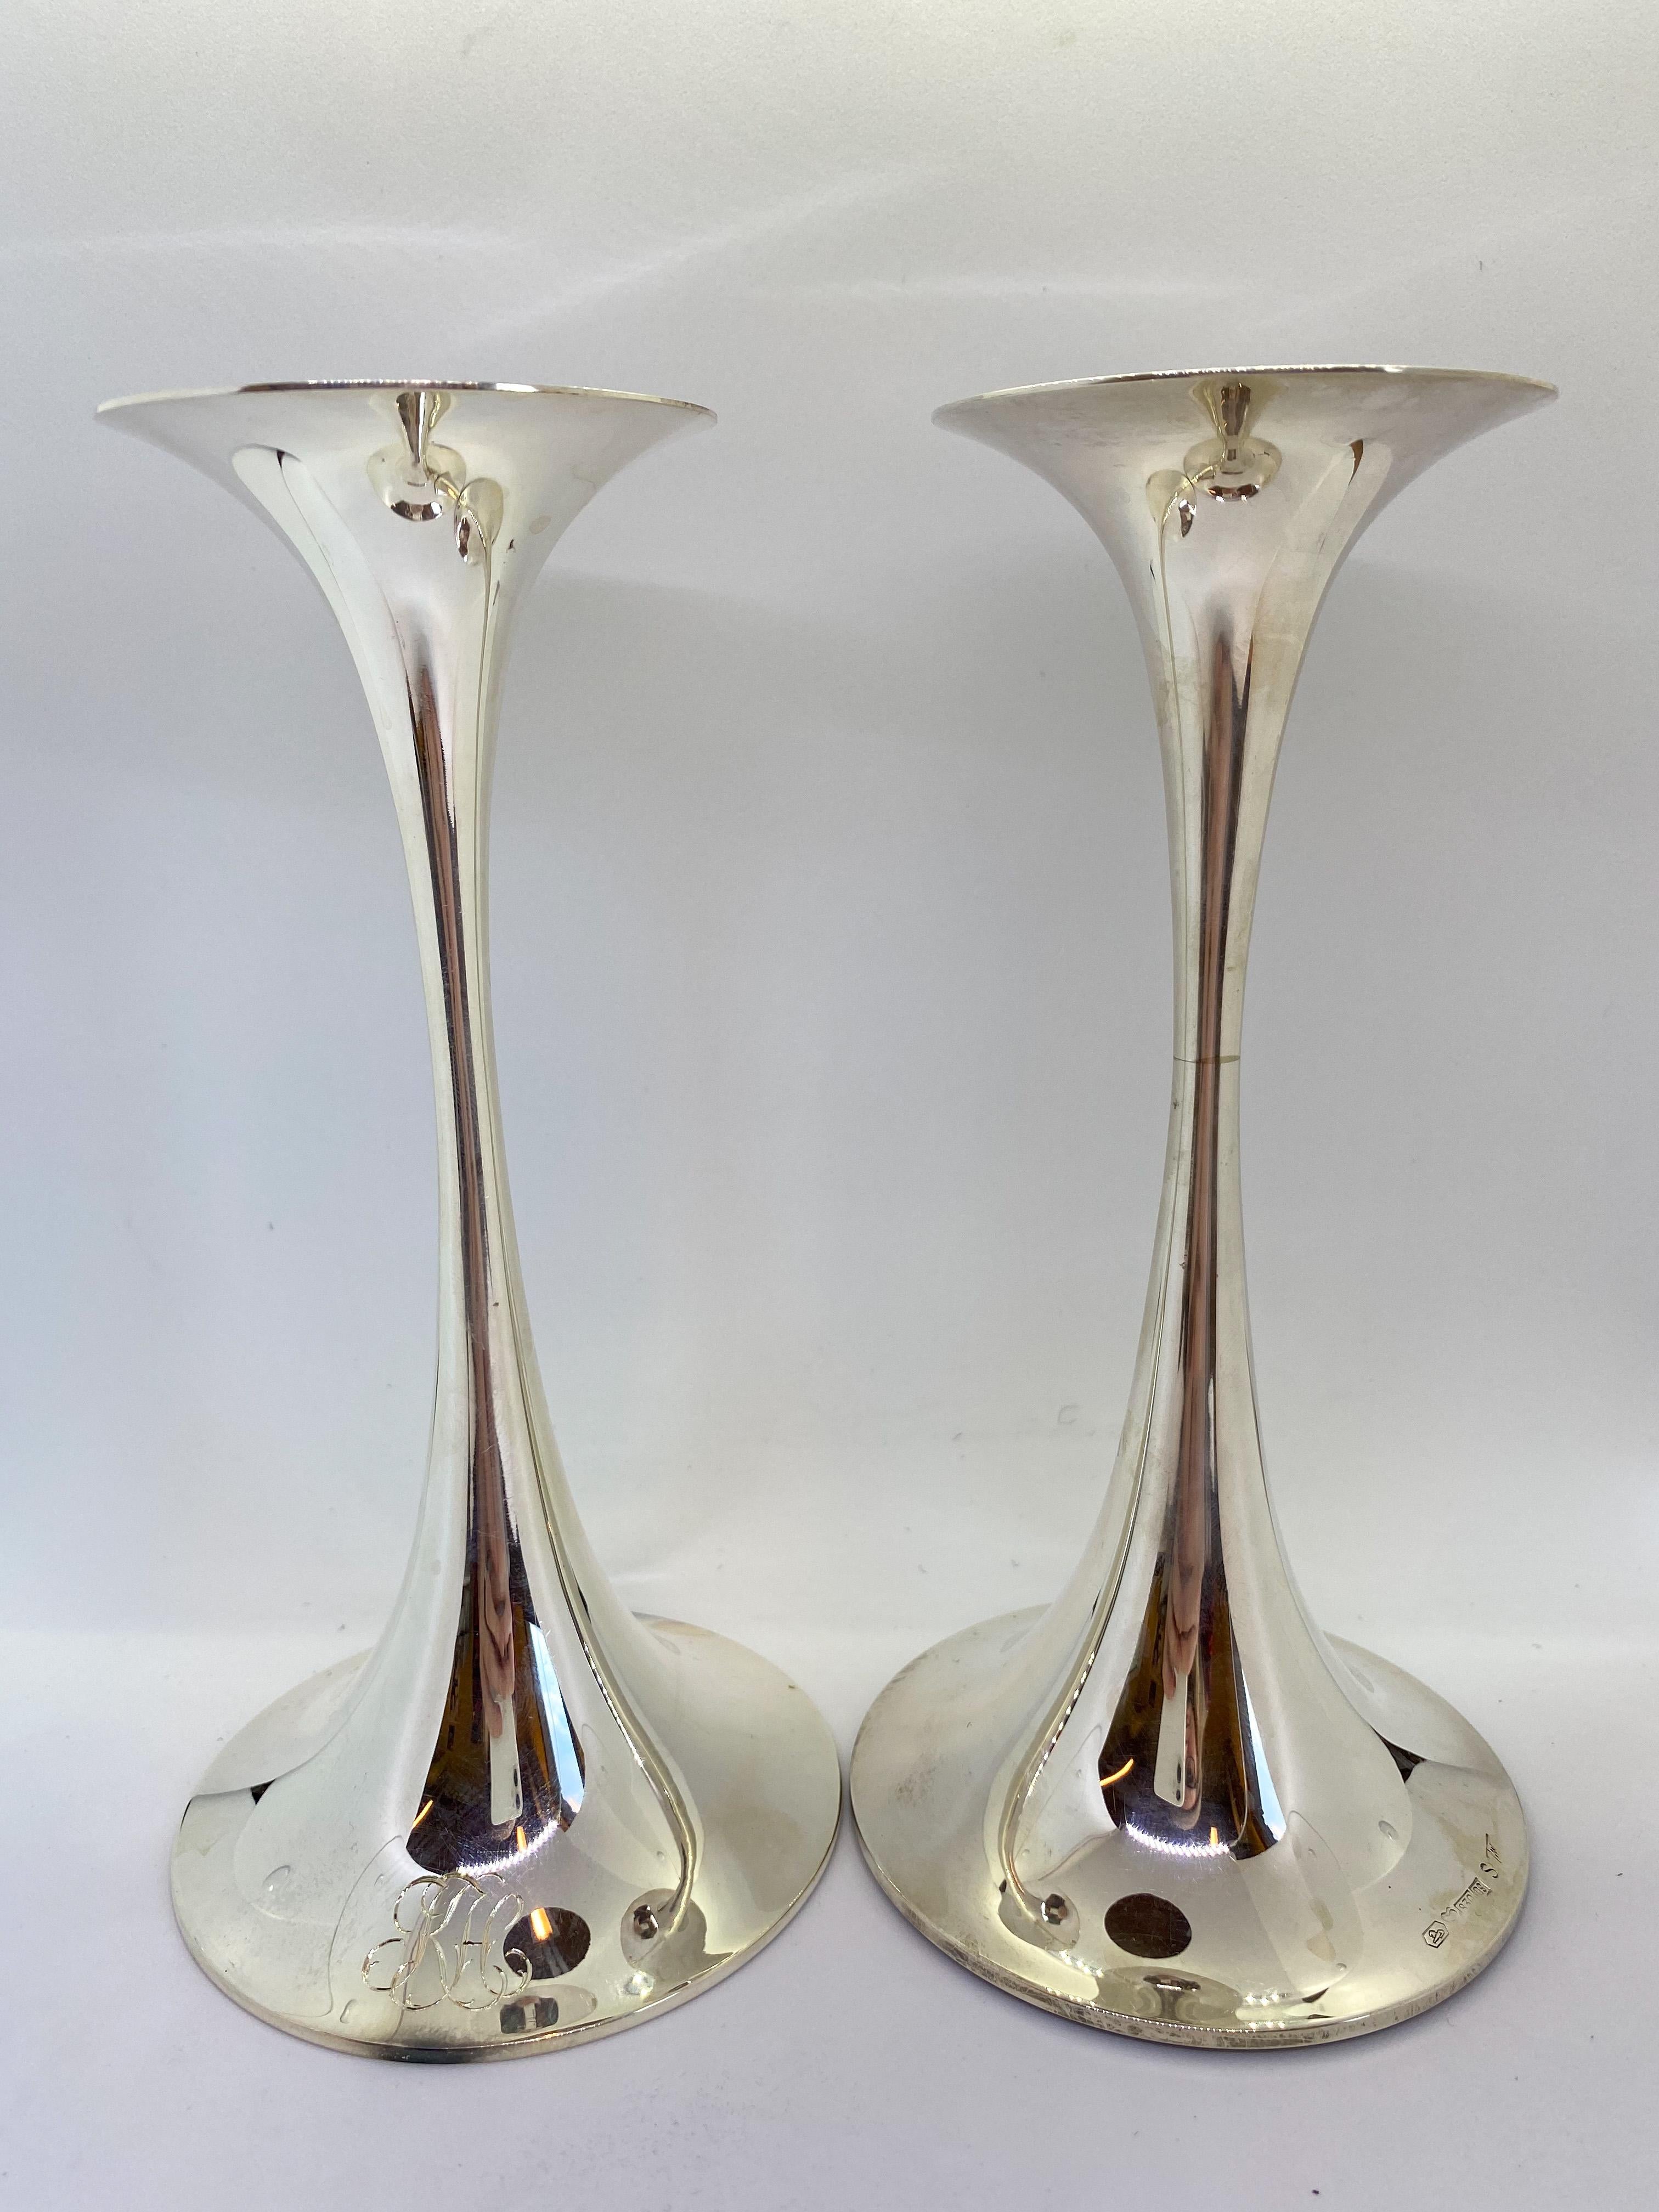 830H Silver Finland Tapio Wirkkala TW 284 Candleholder 
Set of 6 candleholders, 4 of them including engravings
3 different sizes: 1 x 10.3cm, 3 x 14.8cm, 2 x 18.2cm
Tapio Wirkkala works are collected by many important museums in the world, among